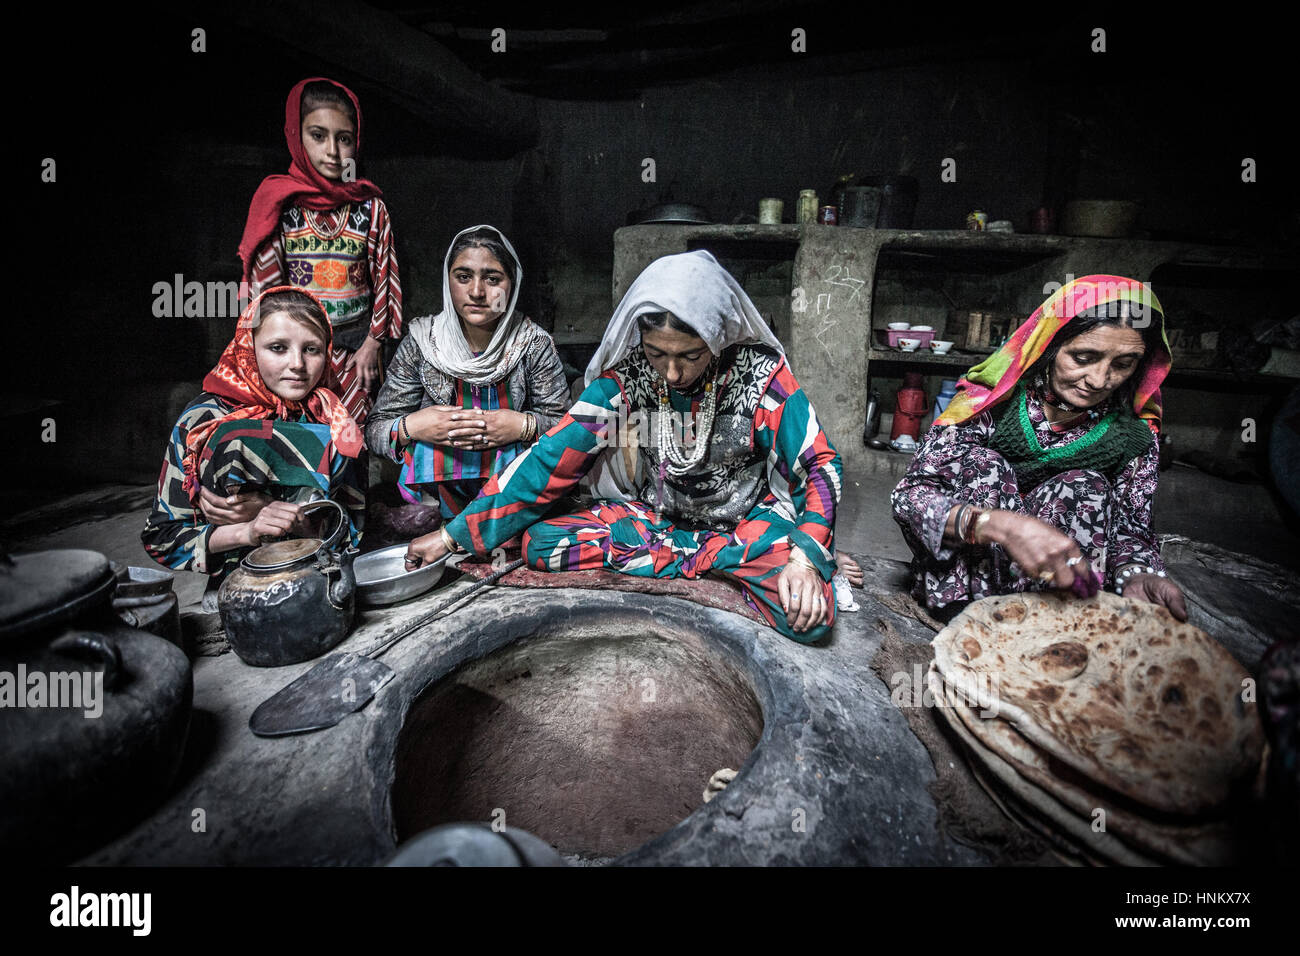 Afghanistan, Wakhan corridor, a group of women is preparing and baking bread in colorful traditional clothes, seated on the ground in stoned kitchen. Stock Photo